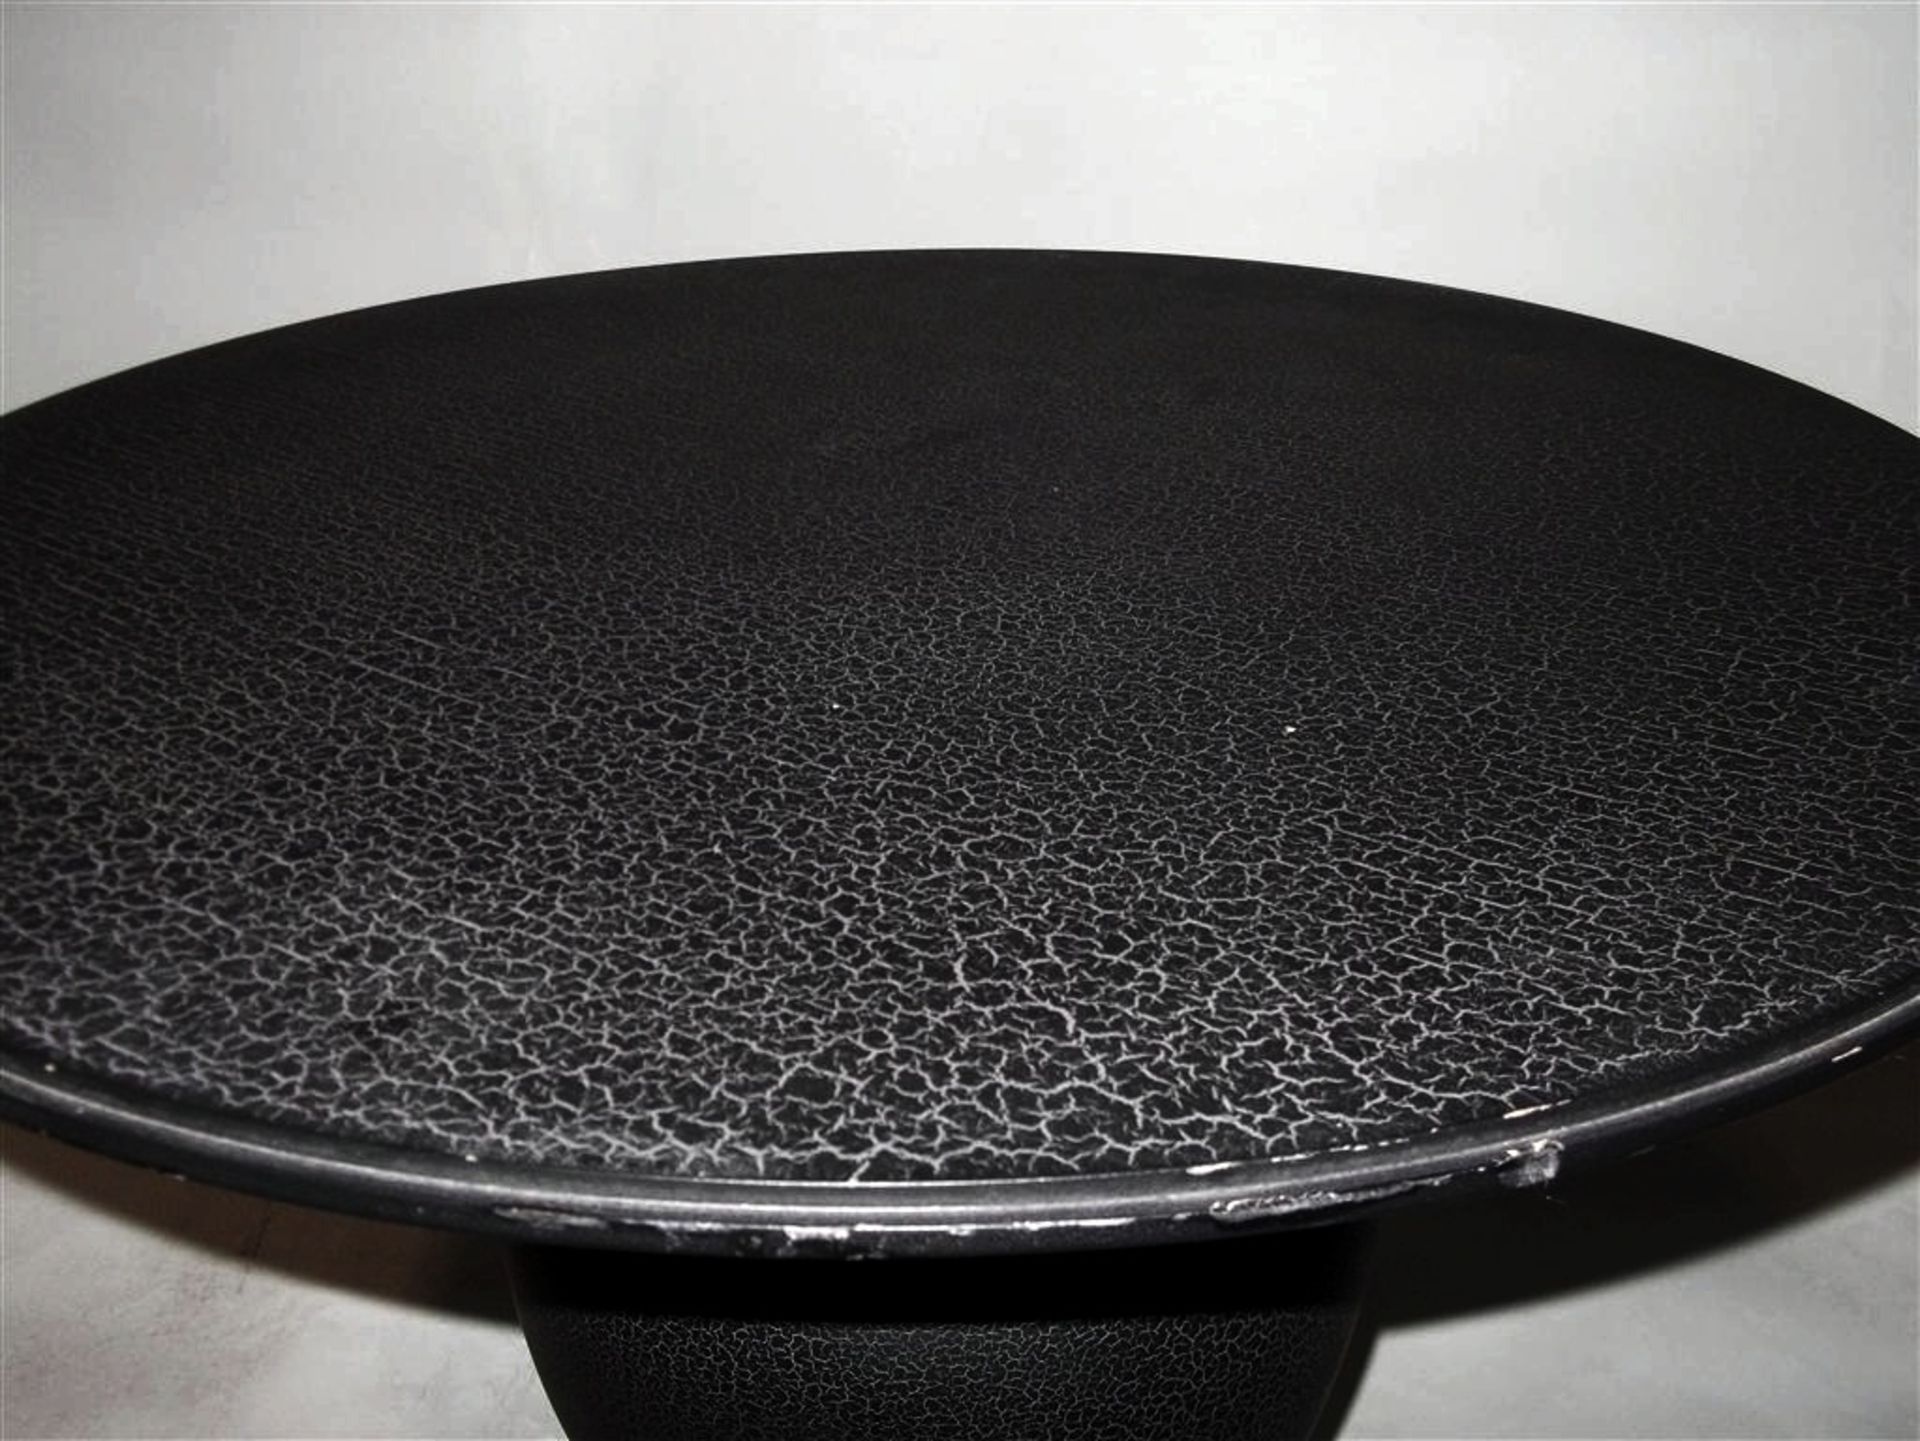 1 x ANGELO CAPPELLINI Opera Contemporary "Pelleas" Lamp Table - Features A Black Crackle Finish - - Image 5 of 5